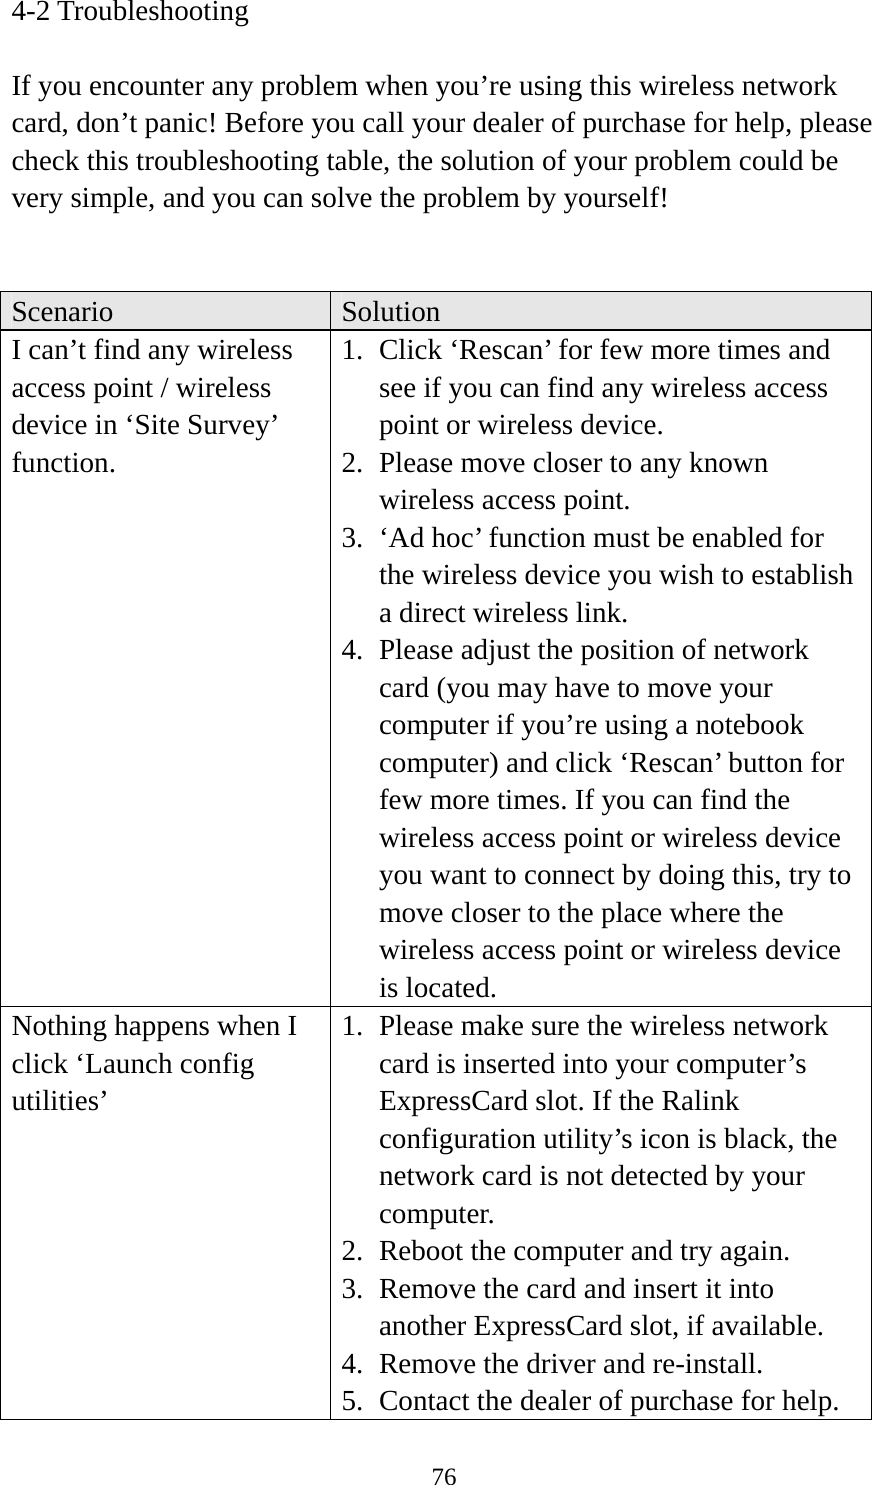  764-2 Troubleshooting  If you encounter any problem when you’re using this wireless network card, don’t panic! Before you call your dealer of purchase for help, please check this troubleshooting table, the solution of your problem could be very simple, and you can solve the problem by yourself!   Scenario  Solution I can’t find any wireless access point / wireless device in ‘Site Survey’ function. 1. Click ‘Rescan’ for few more times and see if you can find any wireless access point or wireless device. 2. Please move closer to any known wireless access point. 3. ‘Ad hoc’ function must be enabled for the wireless device you wish to establish a direct wireless link. 4. Please adjust the position of network card (you may have to move your computer if you’re using a notebook computer) and click ‘Rescan’ button for few more times. If you can find the wireless access point or wireless device you want to connect by doing this, try to move closer to the place where the wireless access point or wireless device is located. Nothing happens when I click ‘Launch config utilities’ 1. Please make sure the wireless network card is inserted into your computer’s ExpressCard slot. If the Ralink configuration utility’s icon is black, the network card is not detected by your computer. 2. Reboot the computer and try again. 3. Remove the card and insert it into another ExpressCard slot, if available. 4. Remove the driver and re-install. 5. Contact the dealer of purchase for help. 